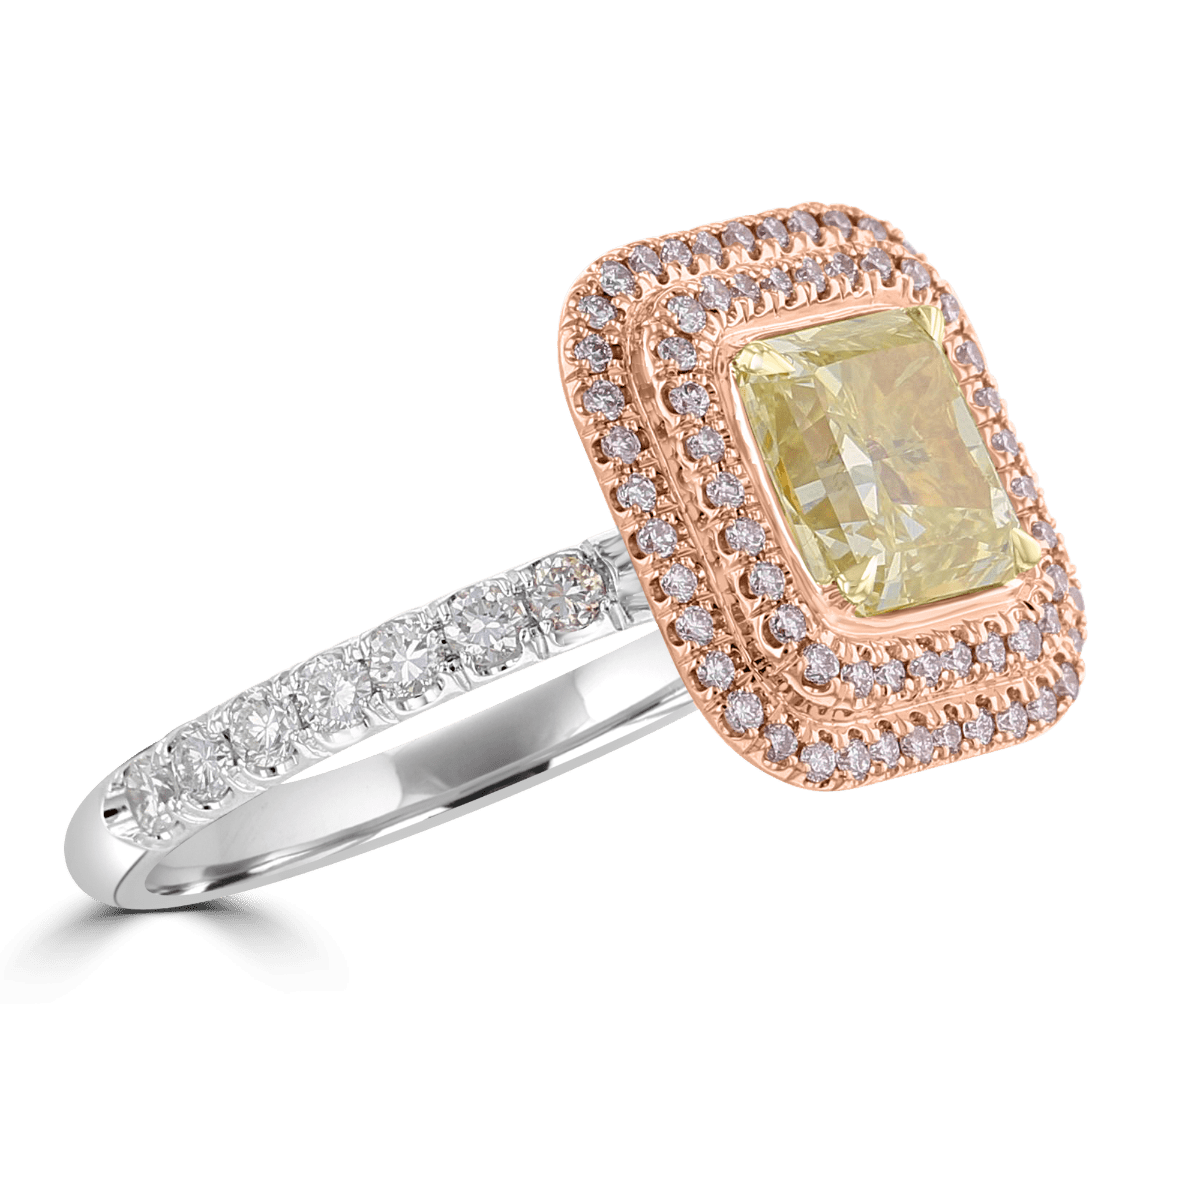 18KT TWO-TONE GOLD 2.75 CTW GREENISH YELLOW & PINK DIAMOND DOUBLE HALO RING 4,4.5,5,5.5,6,6.5,7,7.5,8,8.5,9